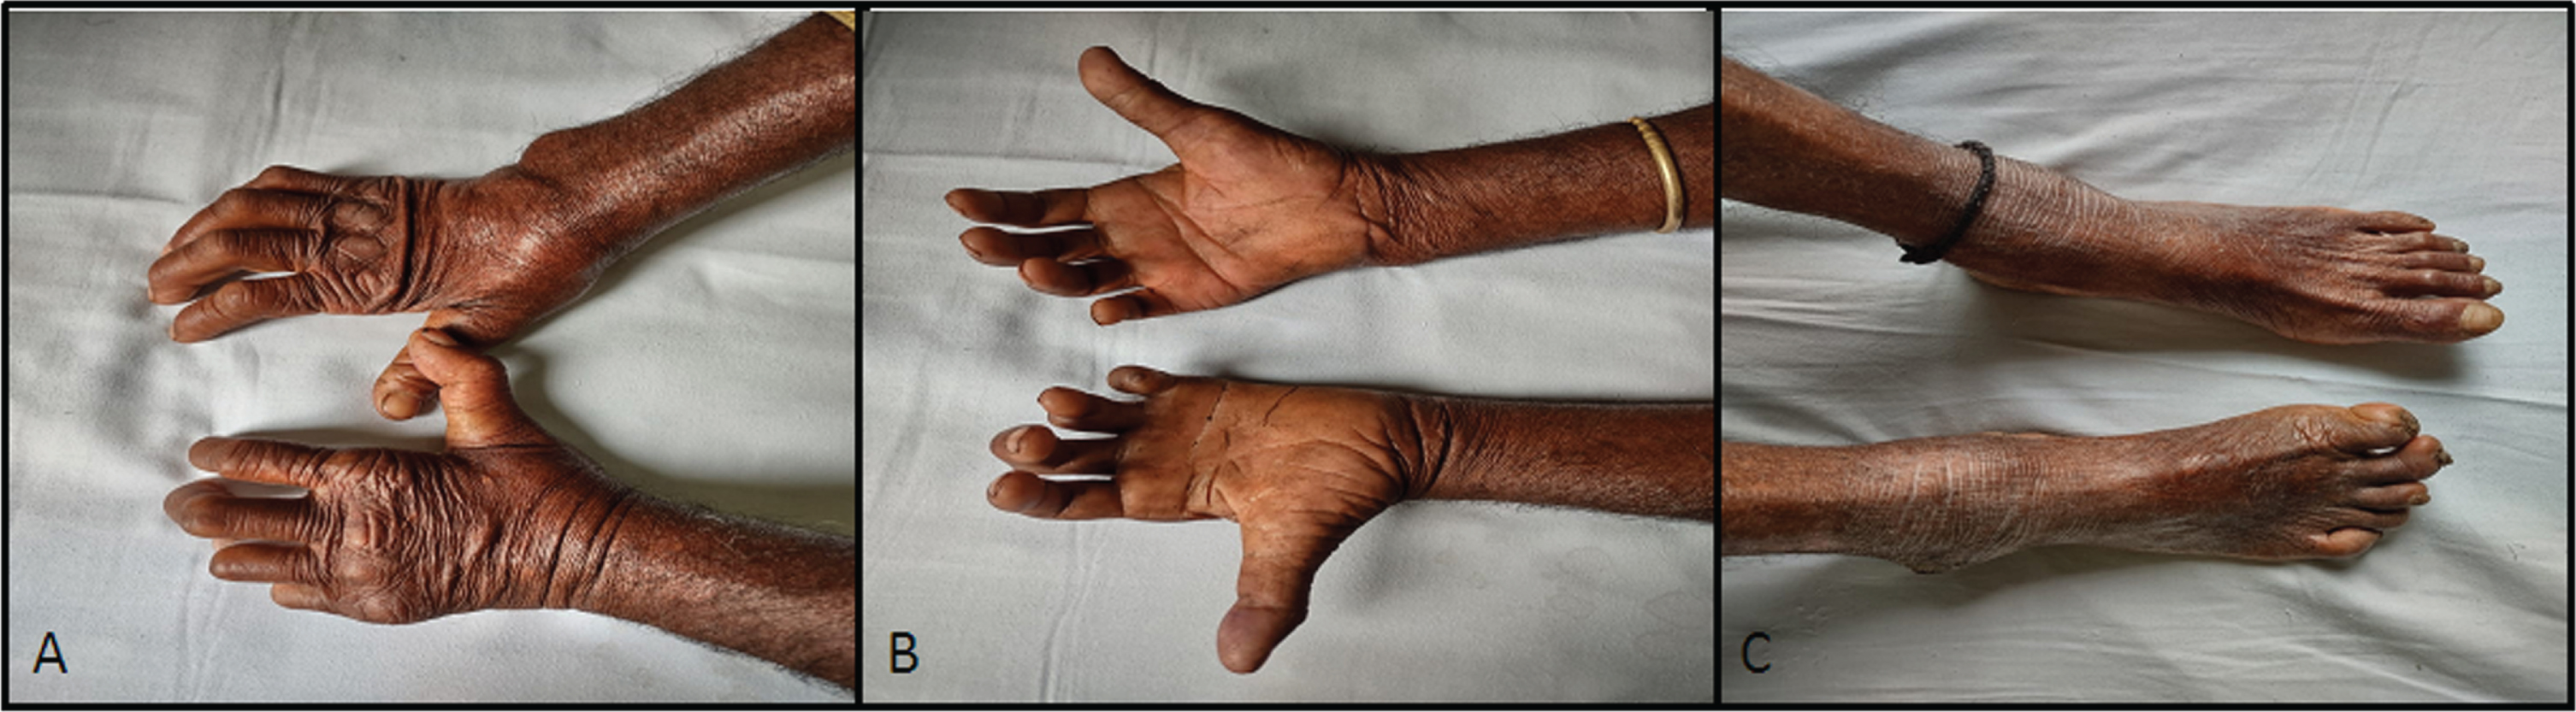 Father aged 64 years developed hand and foot deformities from adolescence which has been minimally to non-progressive. The figures show evidence of severe wasting of the hands and feet with deformities.